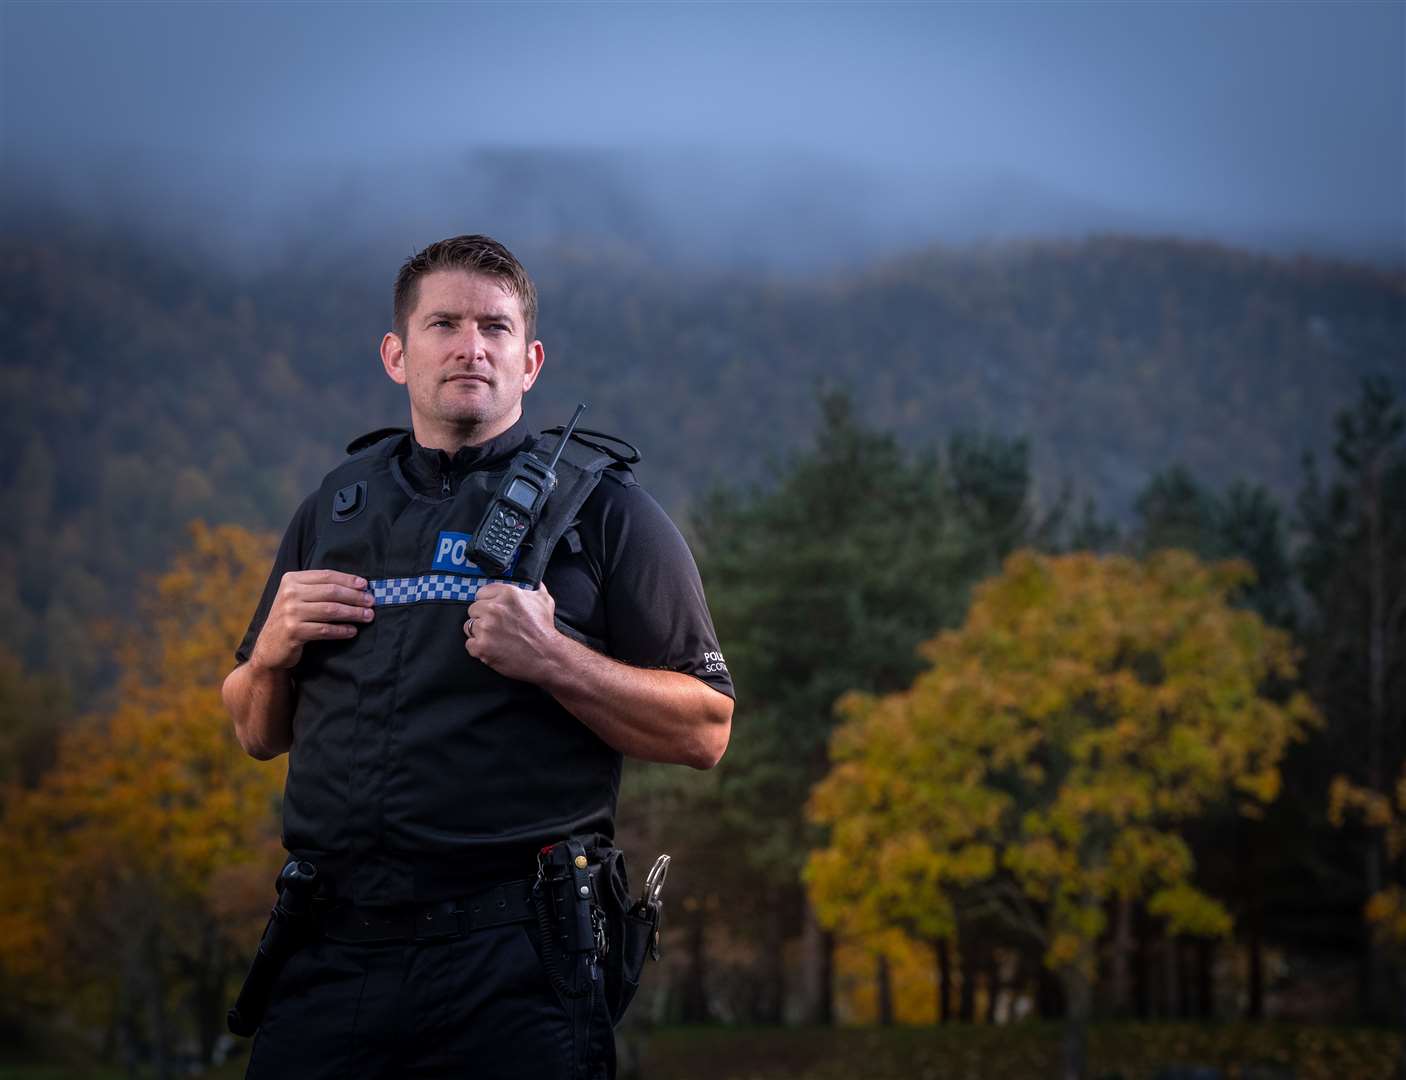 All images © Sandy Young Photography SPF Awards Paul Phillips - Individual Bravery pictured in Aviemore. Web: www.scottishphotographer.com Blog: sandyyoungphotography.wordpress.com Mail: sandy@scottishphotographer.com Tel: 07970 268944 ***Credit should read Sandy Young/scottishphotographer.com***